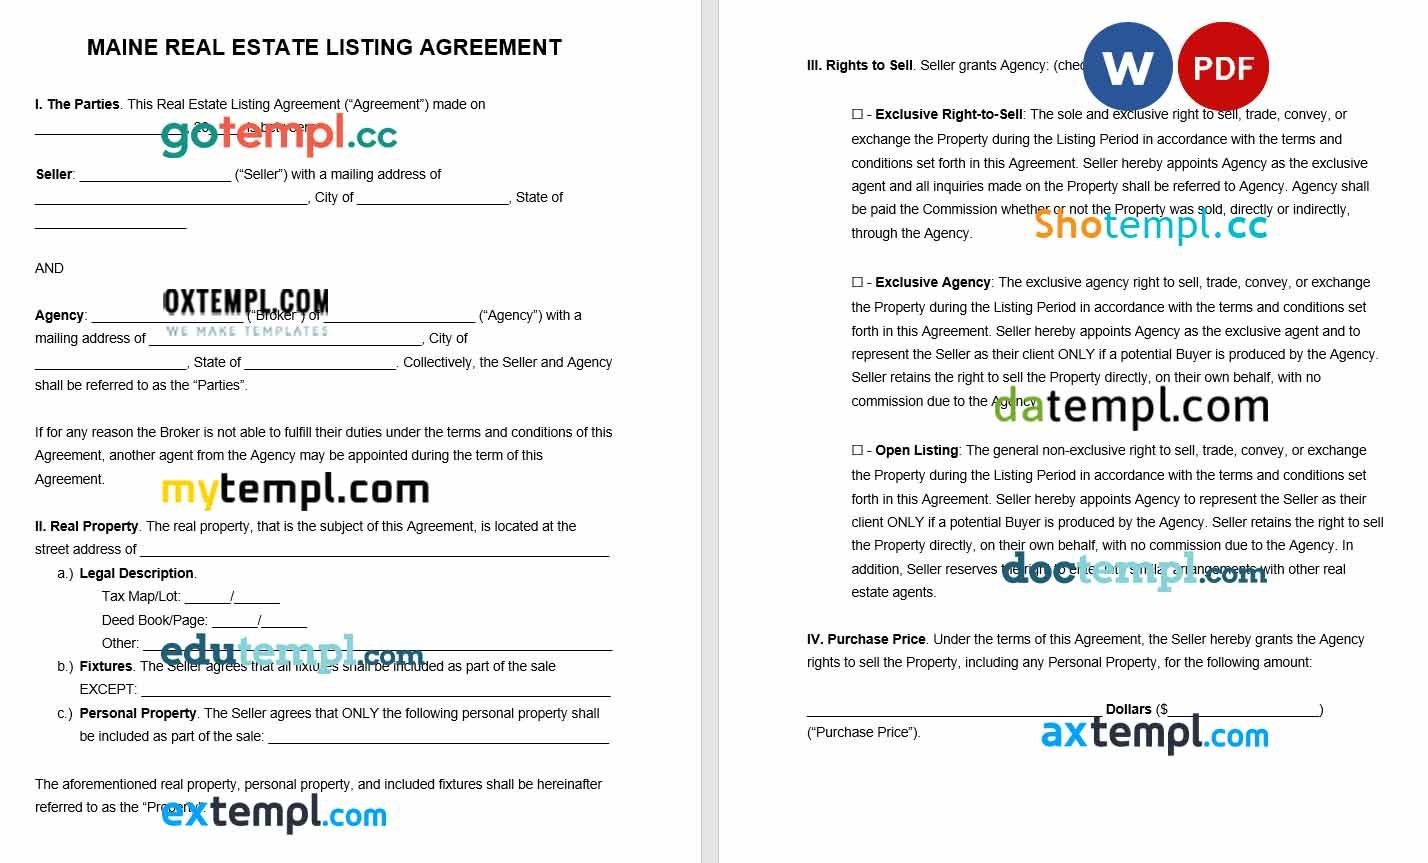 Maine Real Estate Listing Agreement Word example, fully editable